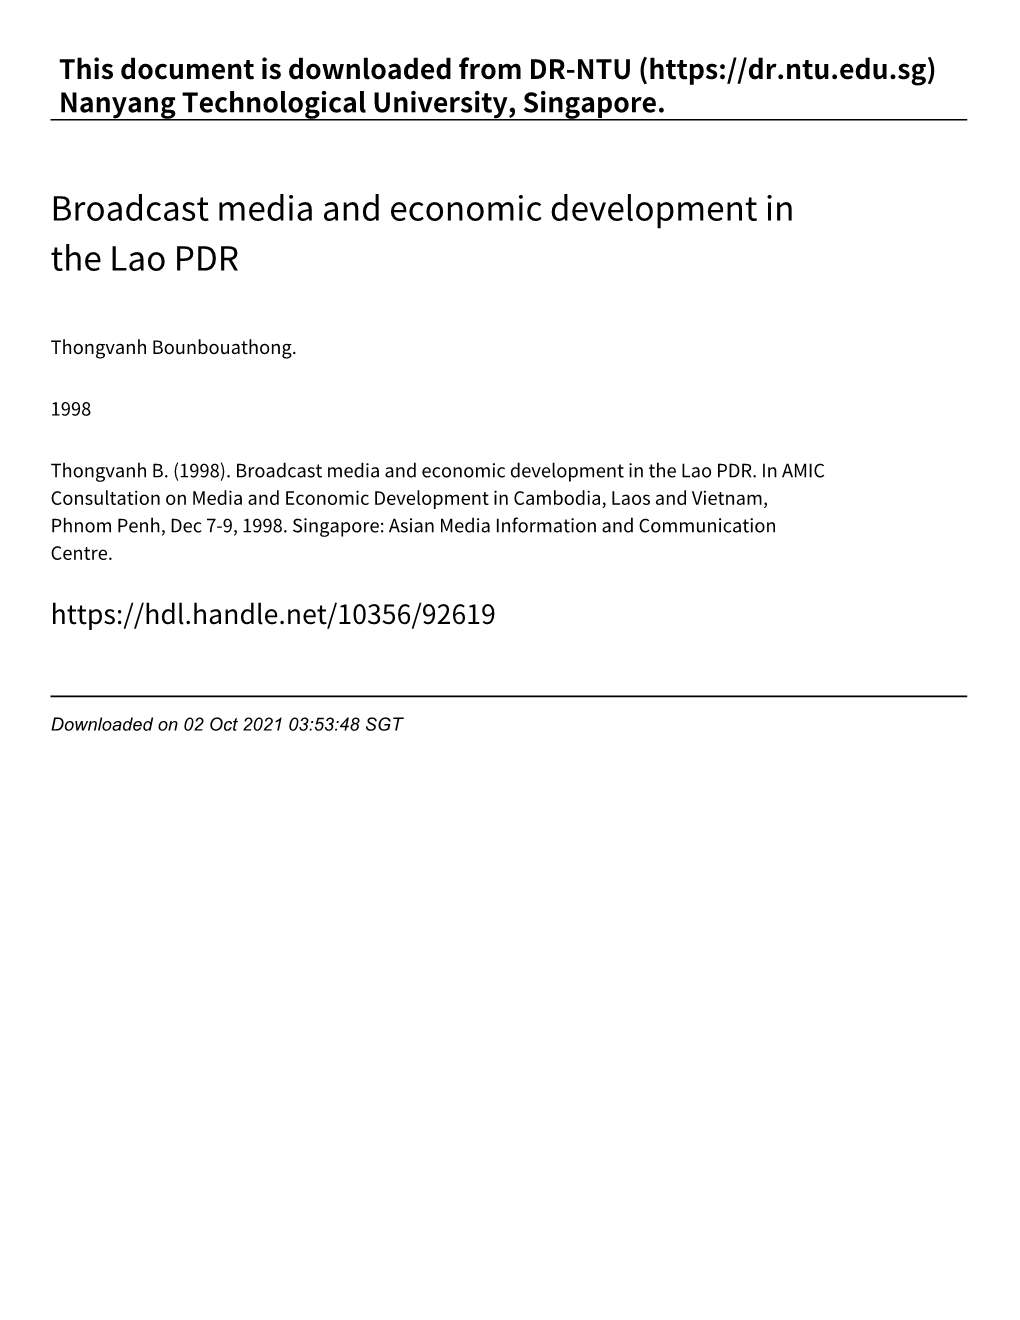 Broadcast Media and Economic Development in the Lao PDR